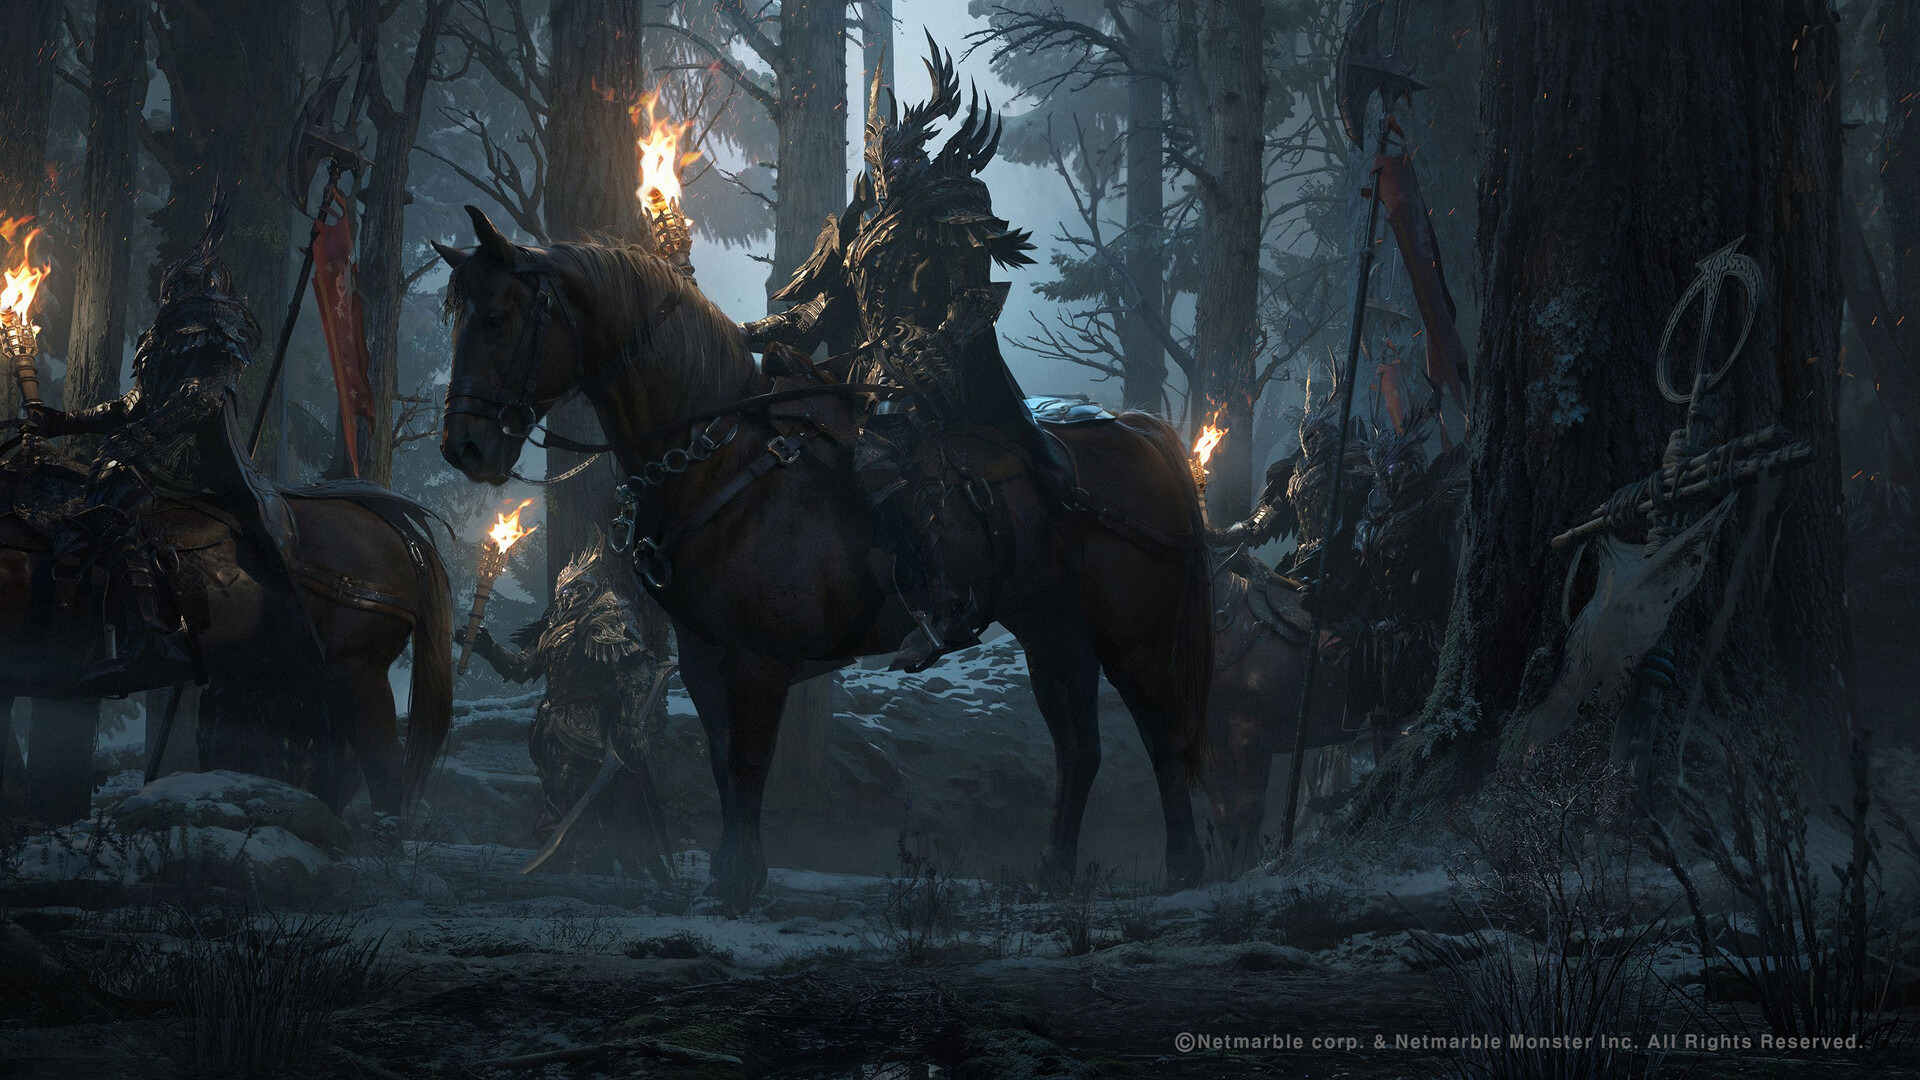 General 1920x1080 Daejeon Jang drawing warrior armor horse torches forest watermarked digital art horseback trees fire ground soldier flag animals